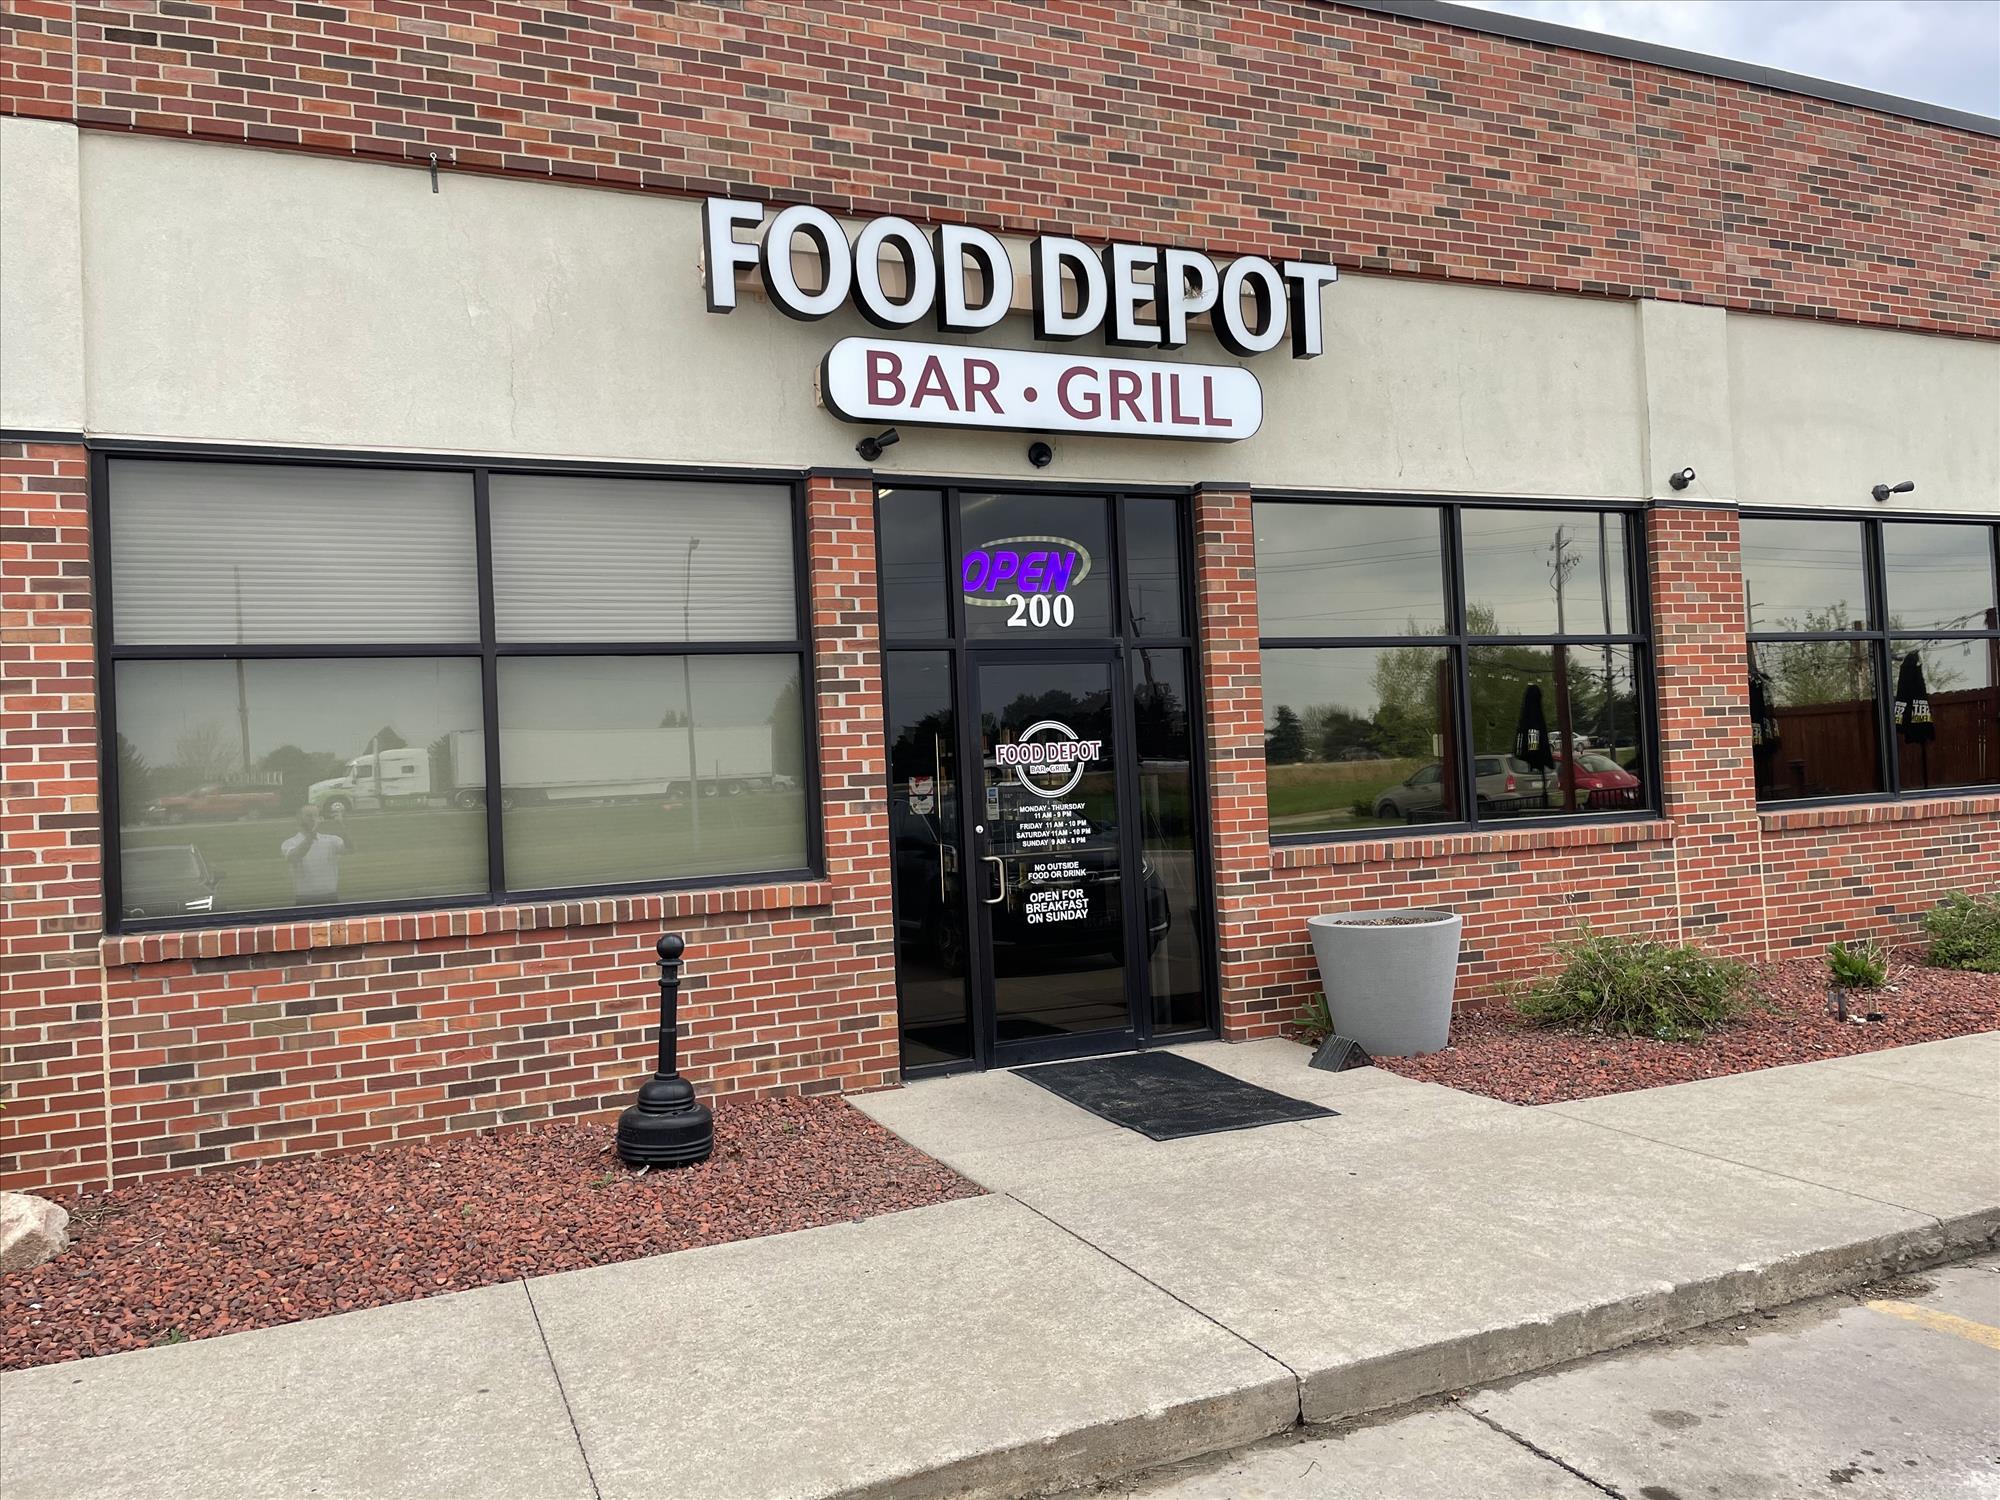 Food Depot Bar and Grill